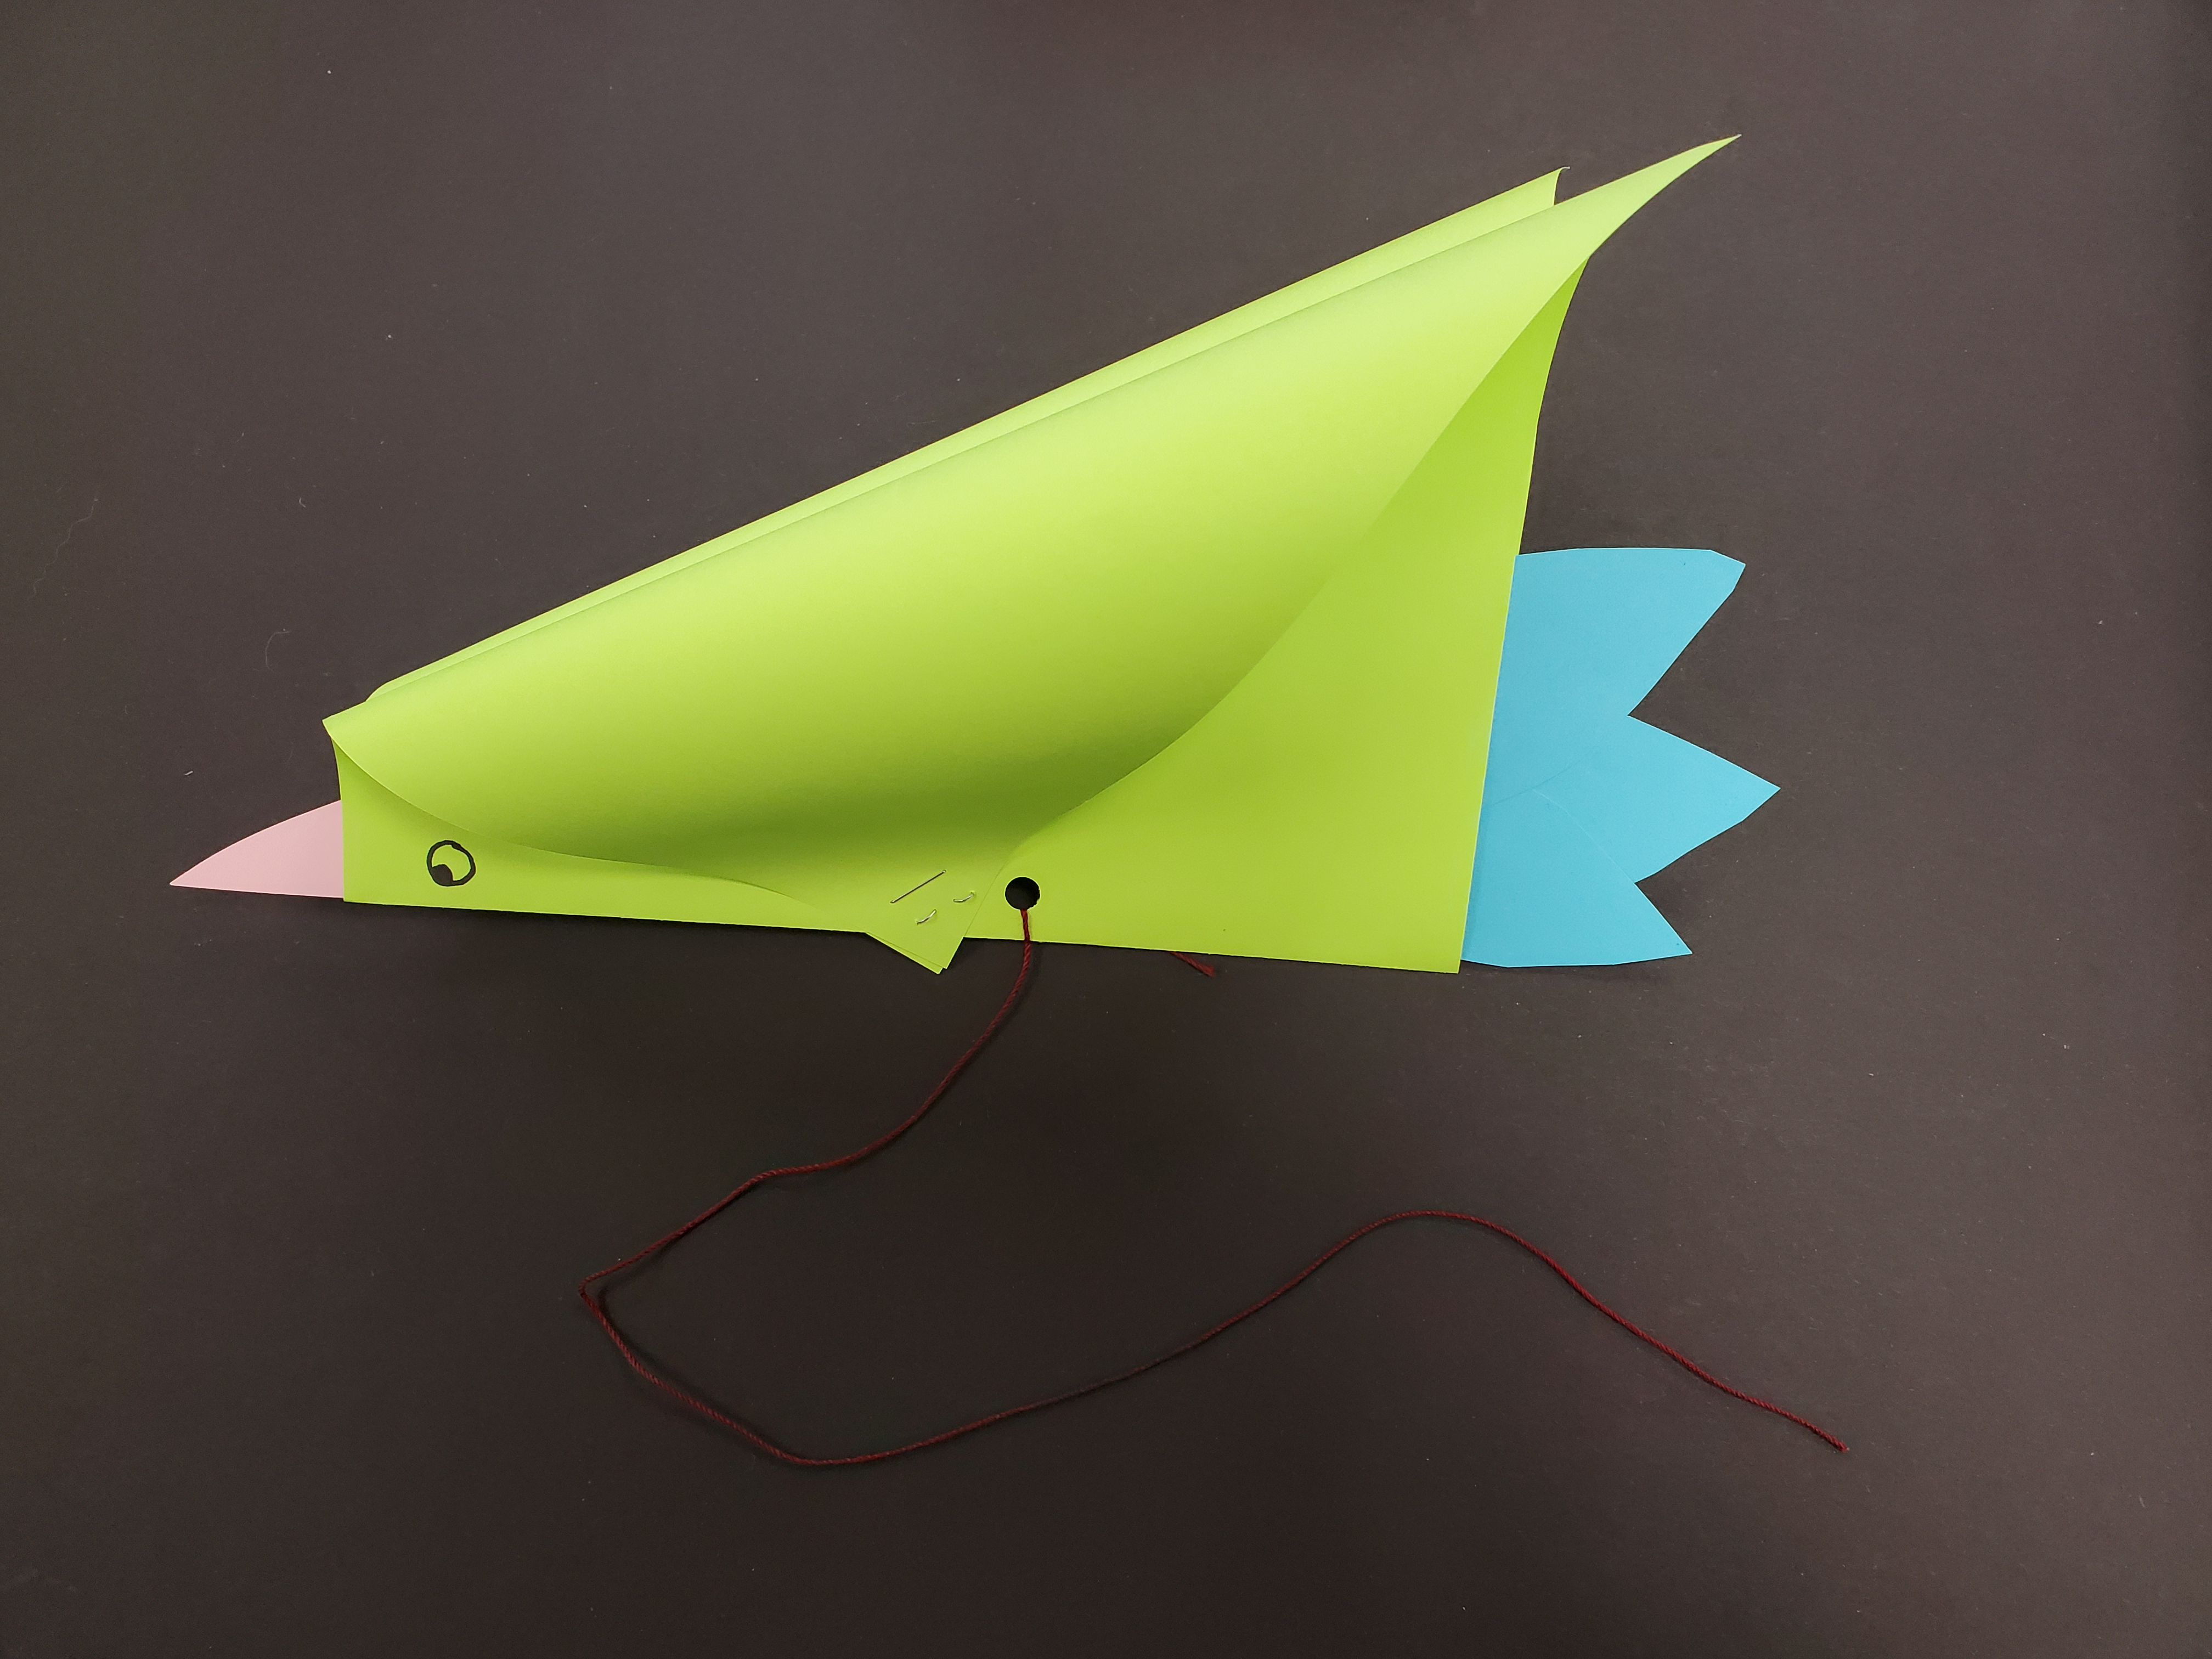 Image of a colored paper craft meant to resemble a bird. The body is made of bright green paper, the beak is cut from pink paper, and the three tail feathers are cut from blue paper. A red string is tied to the craft.